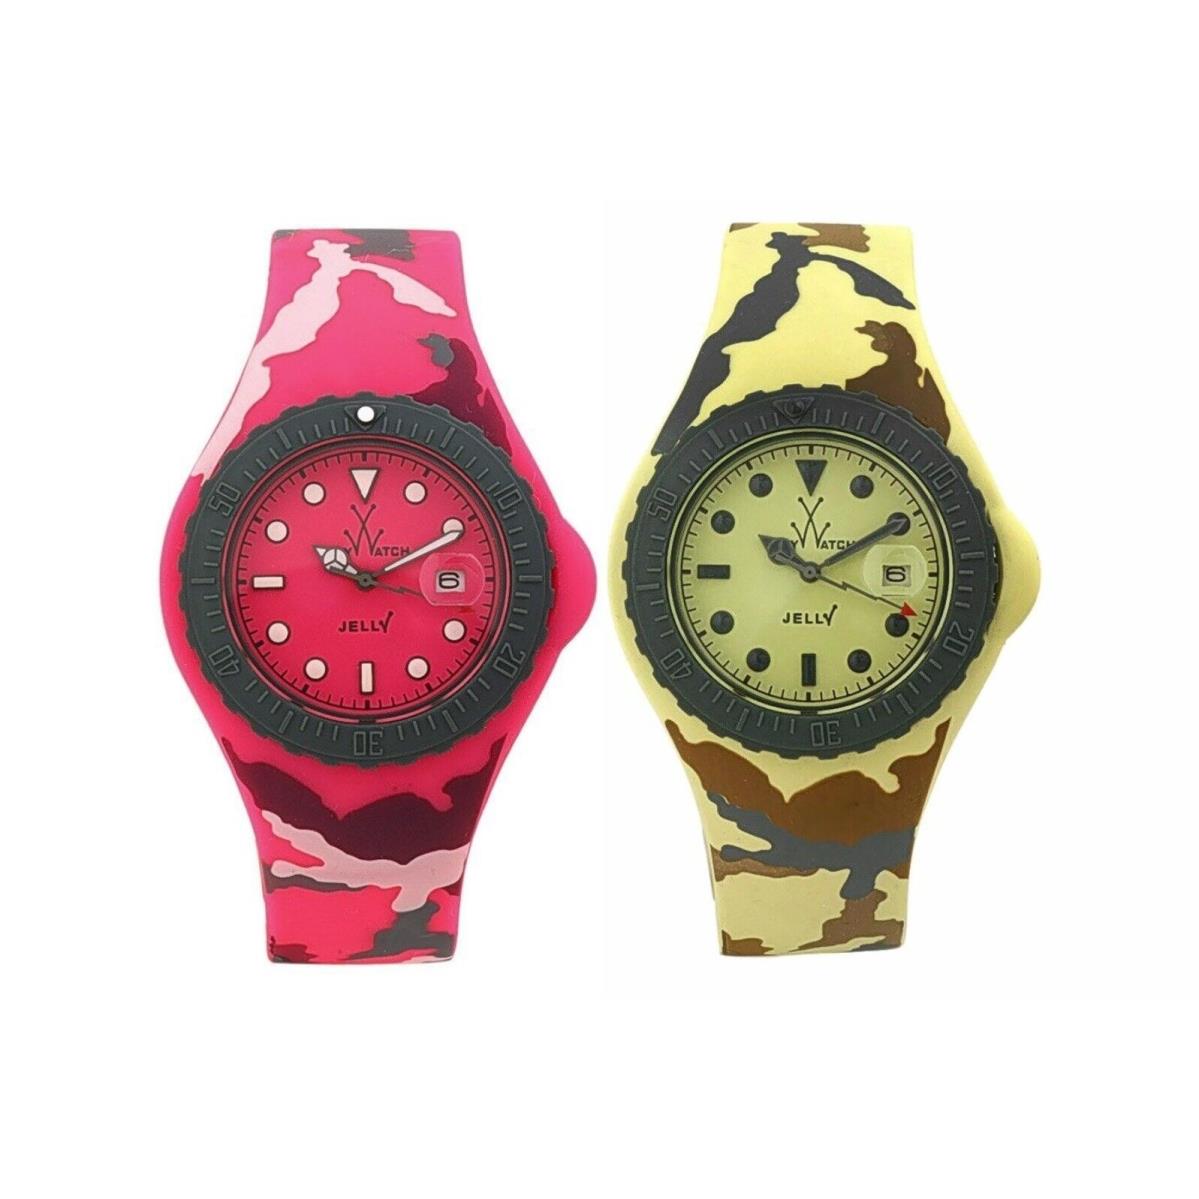 Lot of 2 Jelly Camo Toywatch with Interchangeable Dials